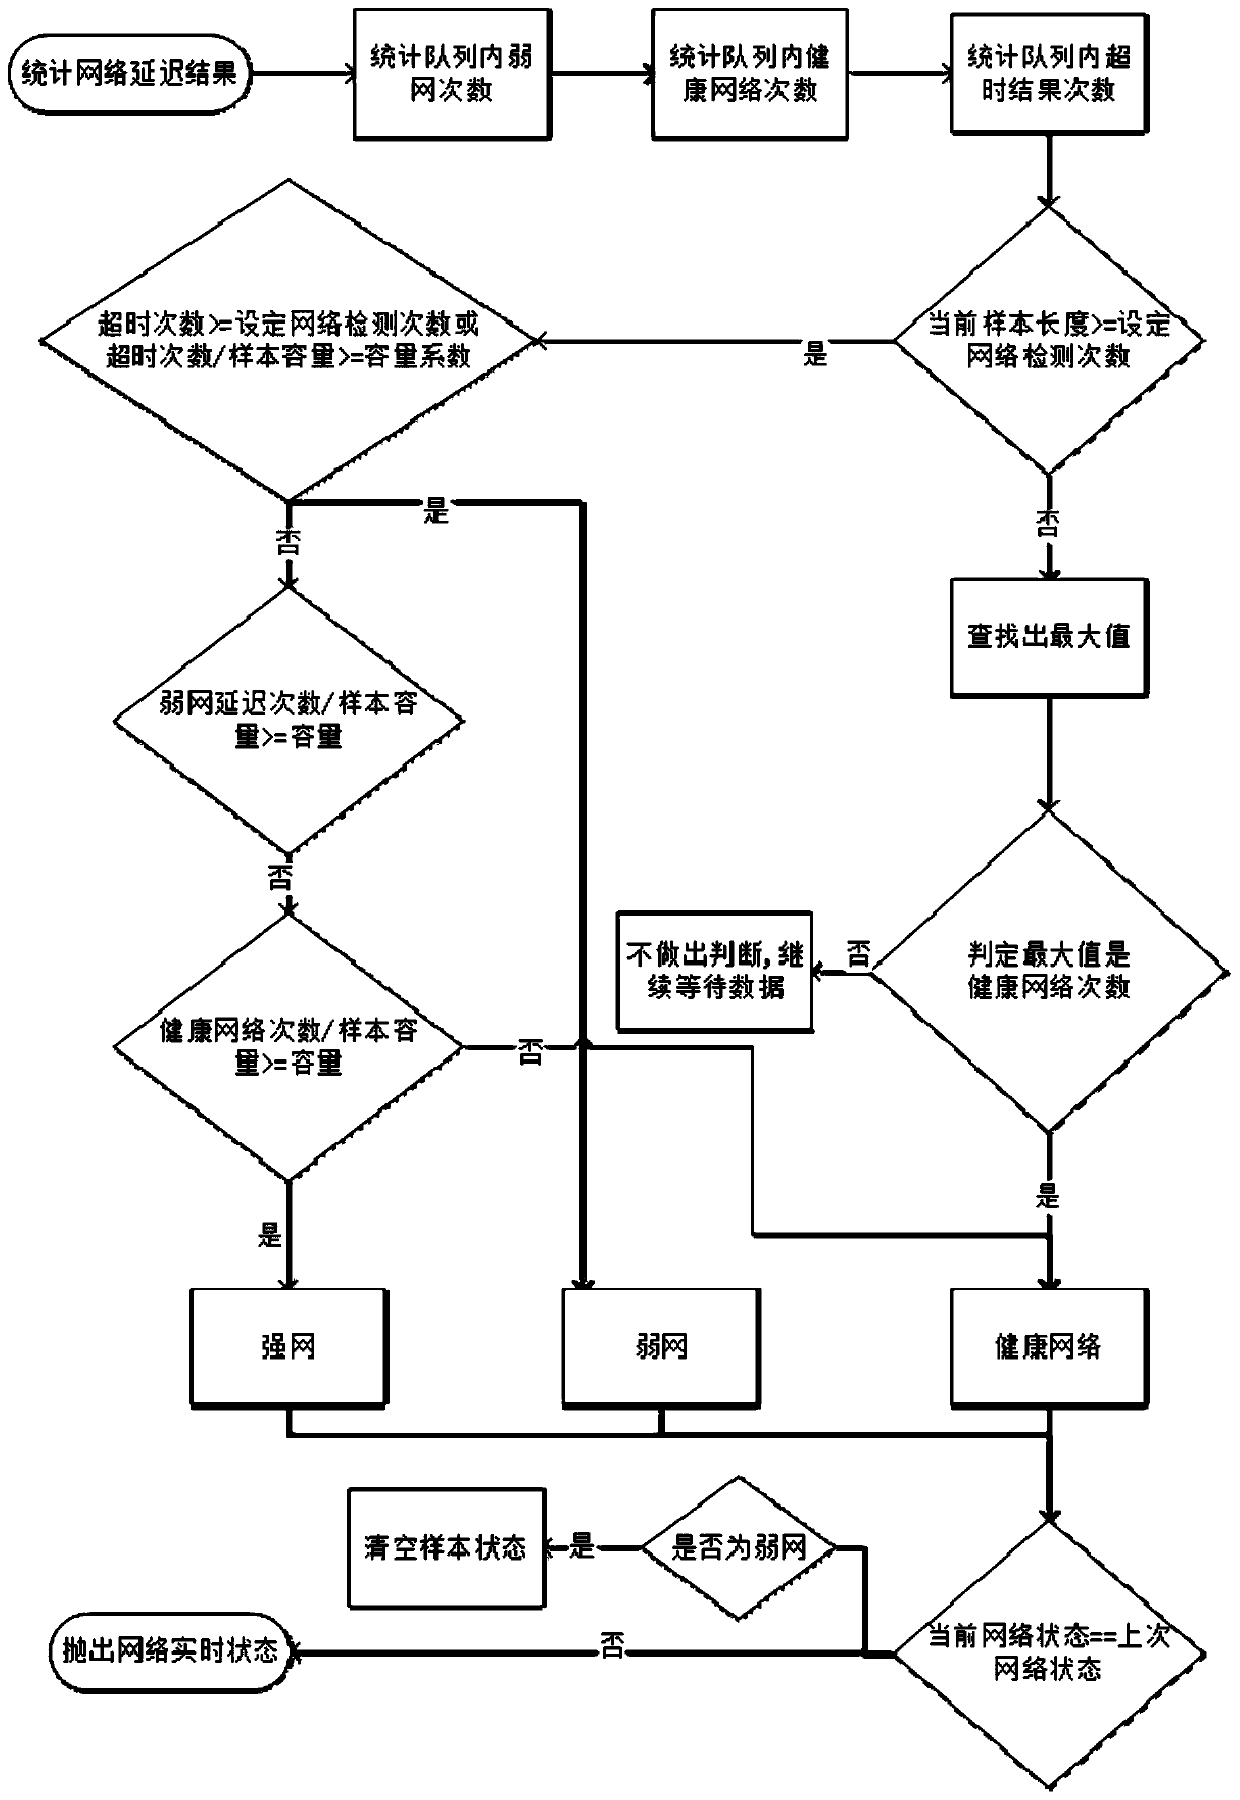 Network monitoring method and network monitoring system based on Socket Connect